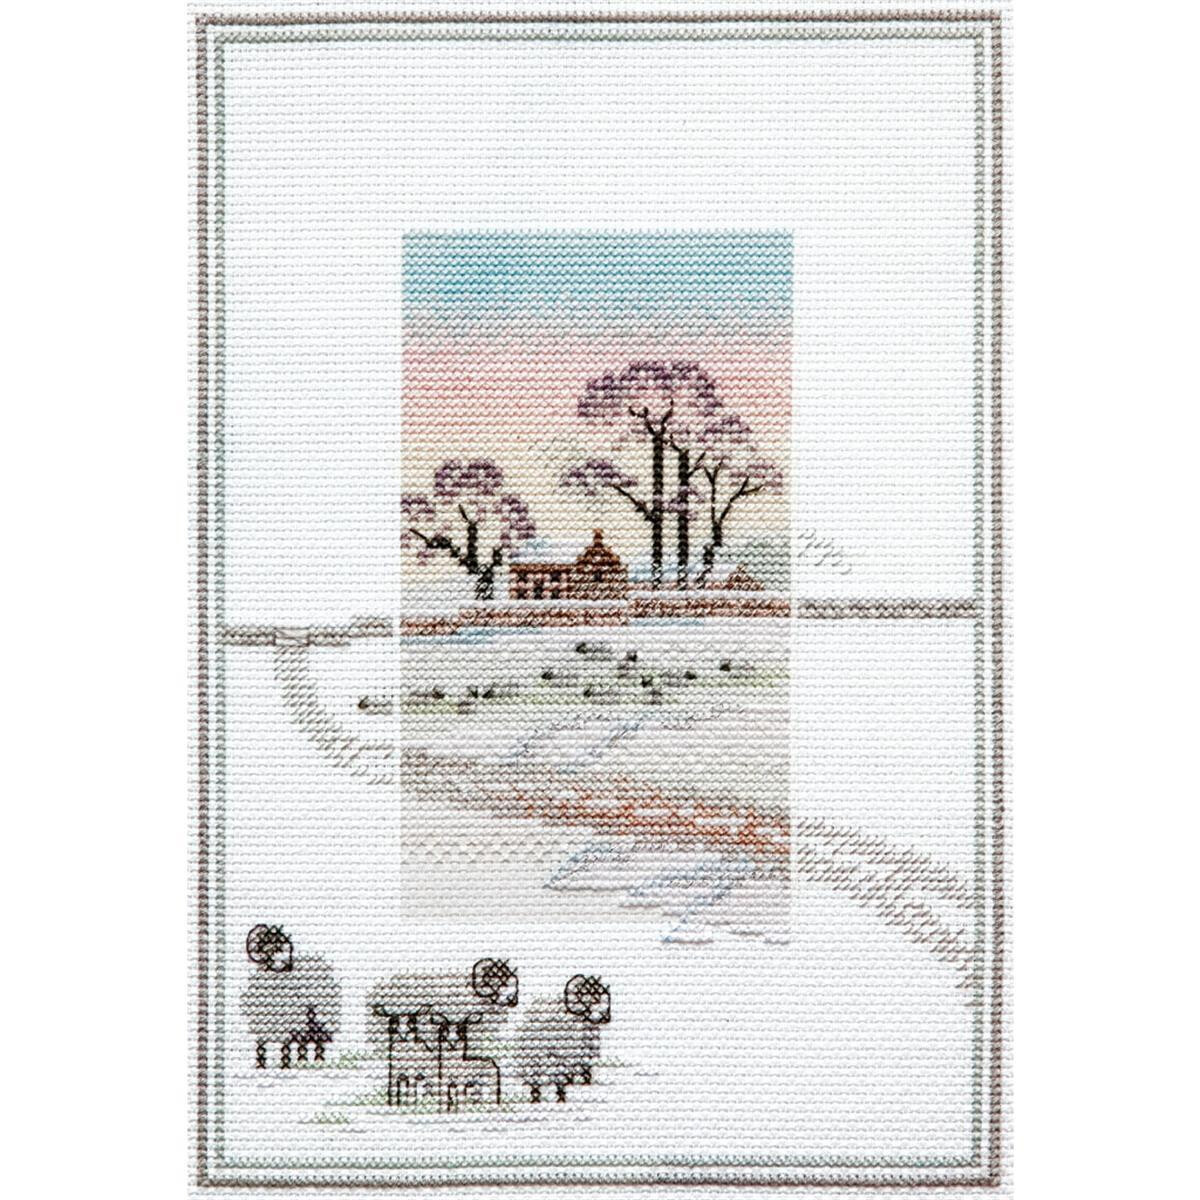 A winter landscape stitched in cross stitch or embroidery...